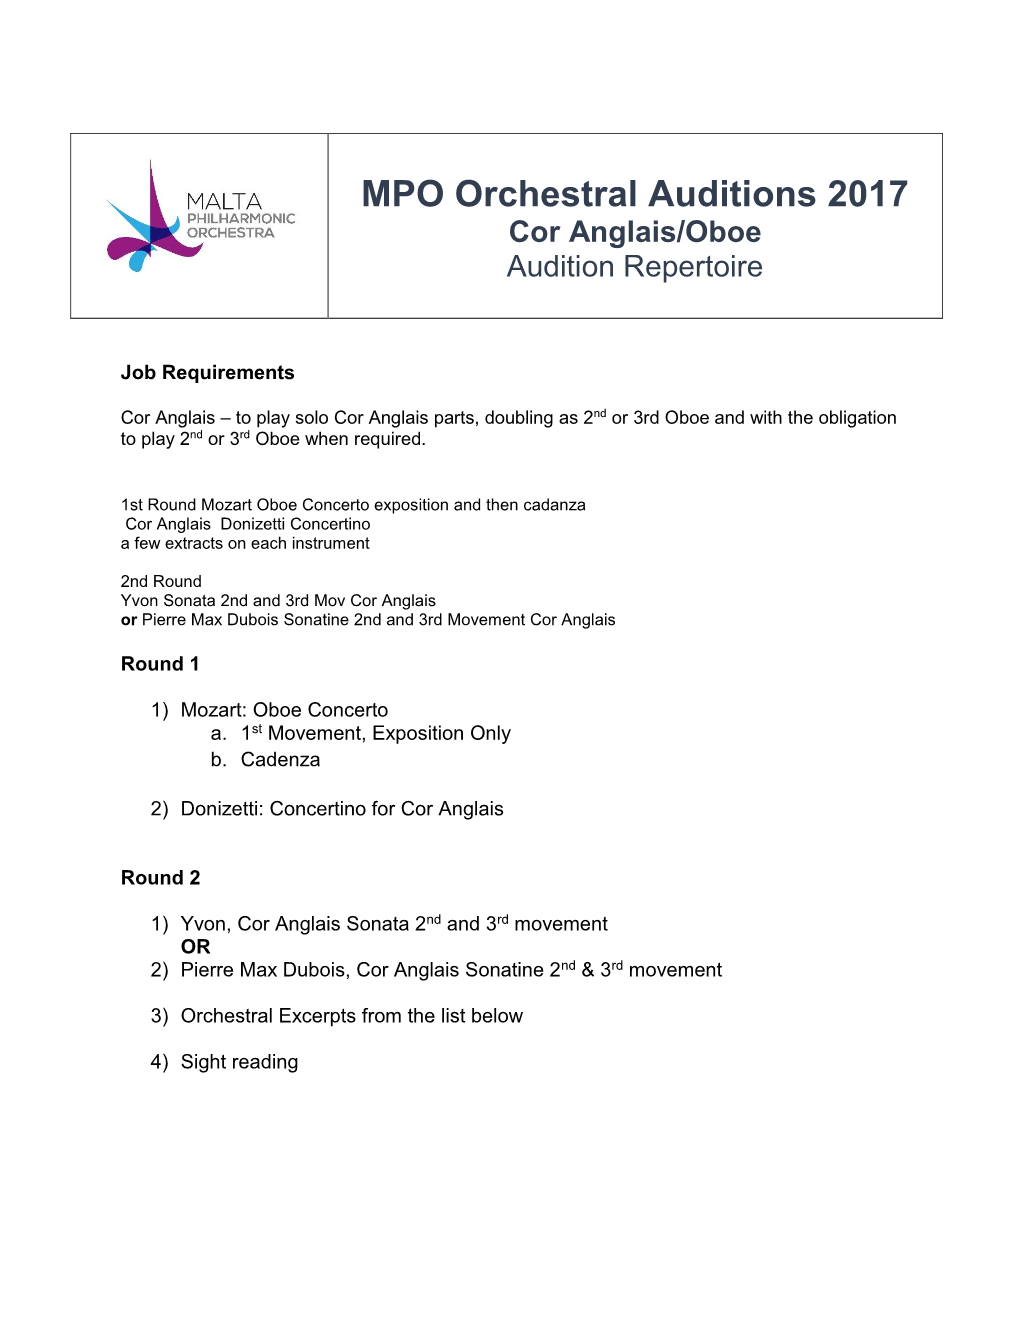 MPO Orchestral Auditions 2017 Cor Anglais/Oboe Audition Repertoire